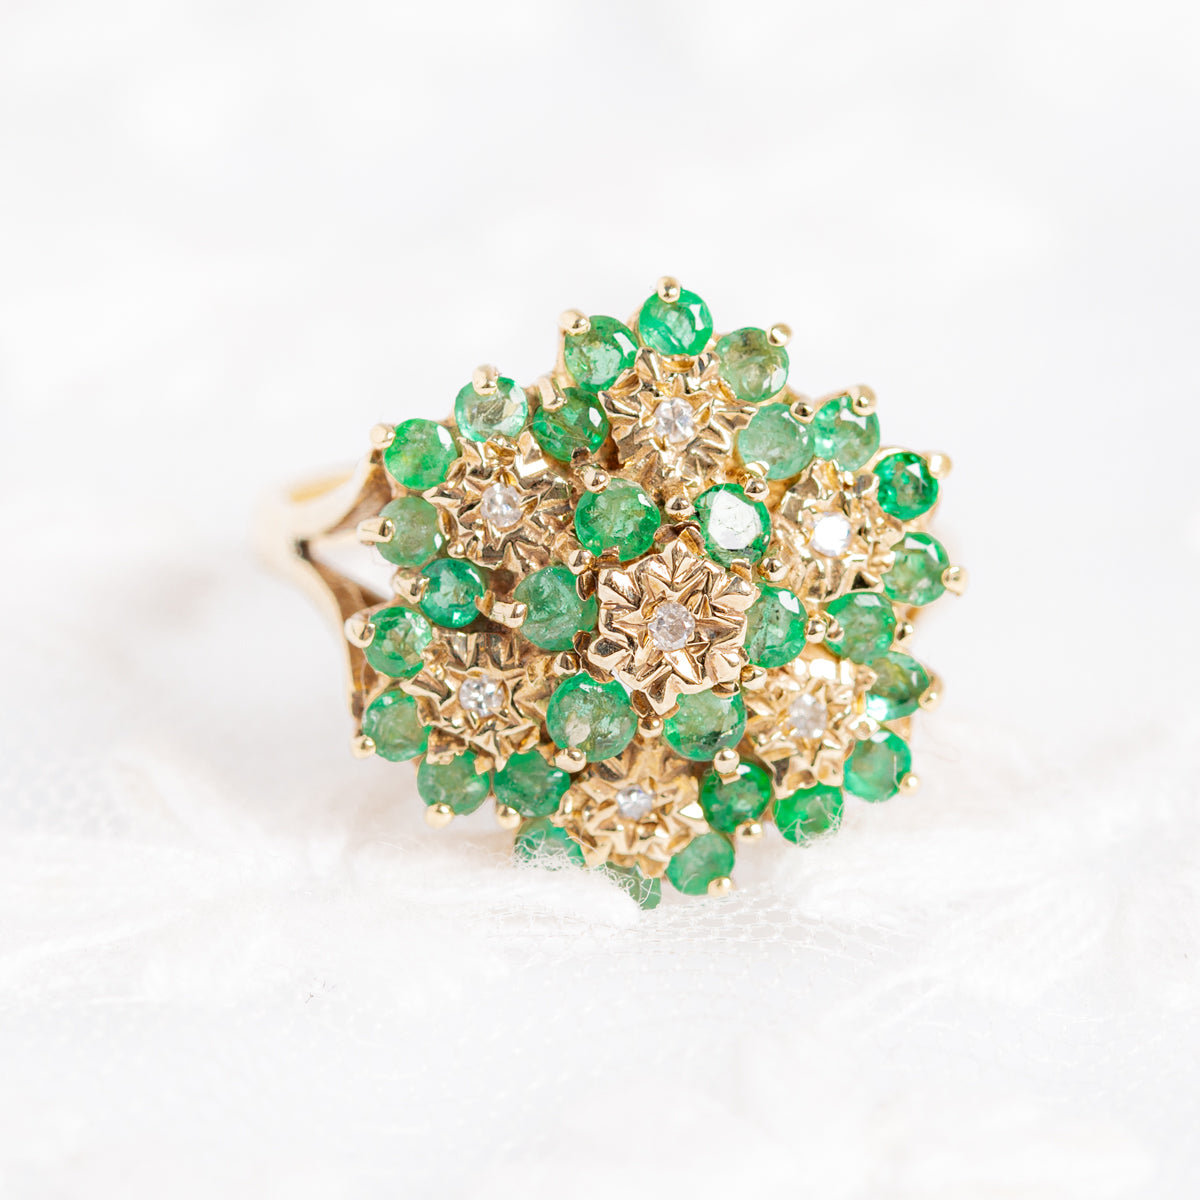 9ct Gold Emerald & Diamond Ring Large Cocktail Cluster Vintage 9K 1990's (A1384)